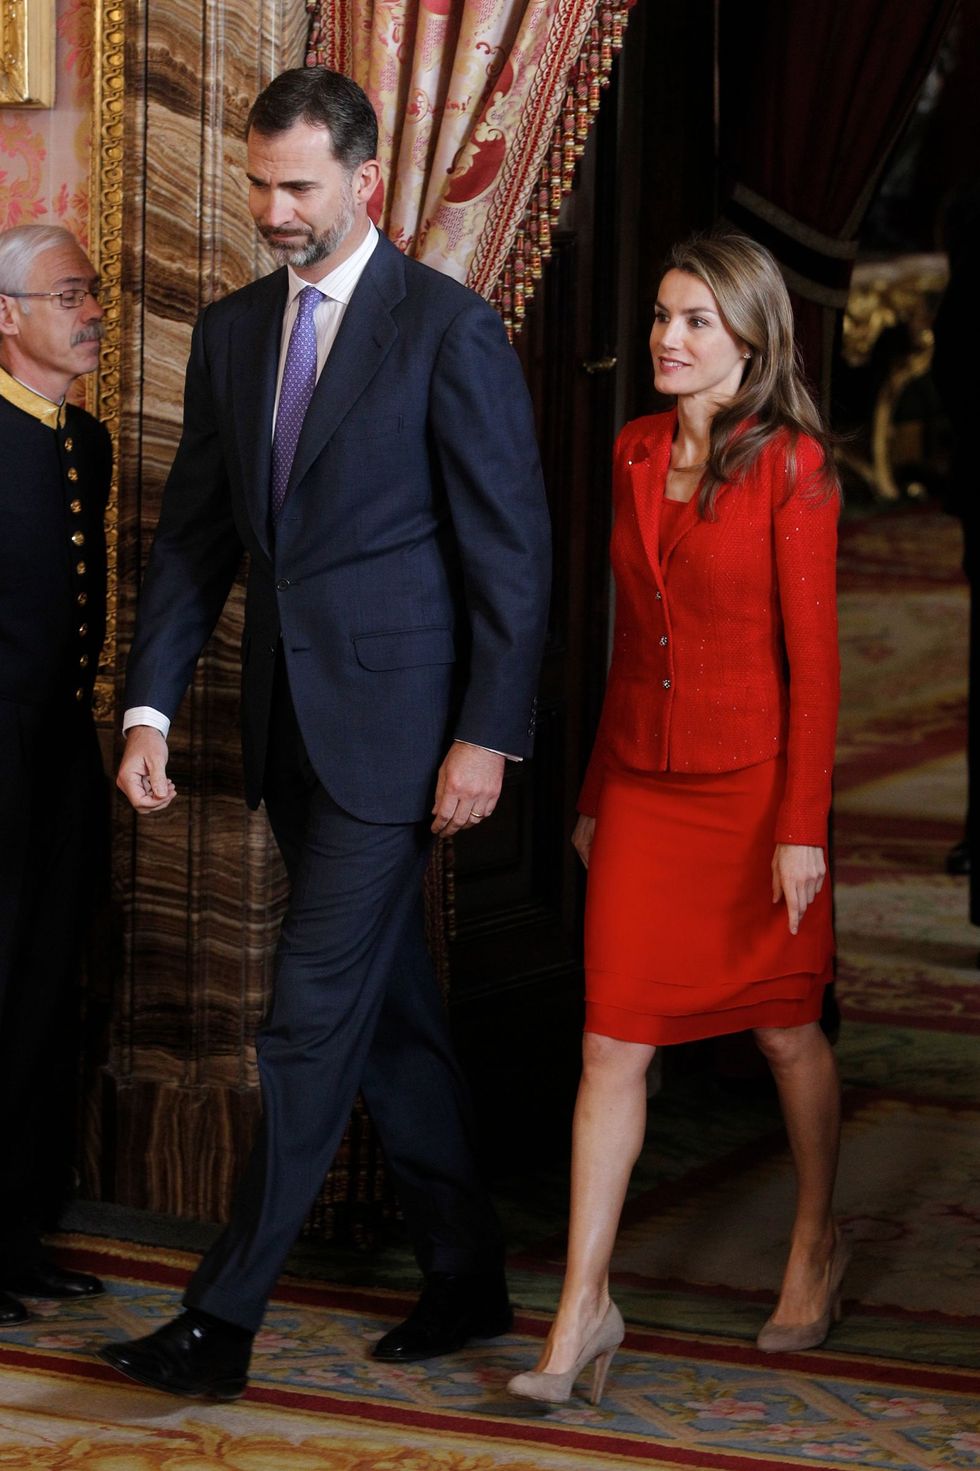 MADRID, SPAIN - APRIL 22:  Prince Felipe of Spain and Princess Letizia of Spain attend a lunch for the "2013 Cervantes Award" at the Royal Palace on April 22, 2013 in Madrid, Spain.  (Photo by Miguel Acero - Pool/Getty Images)